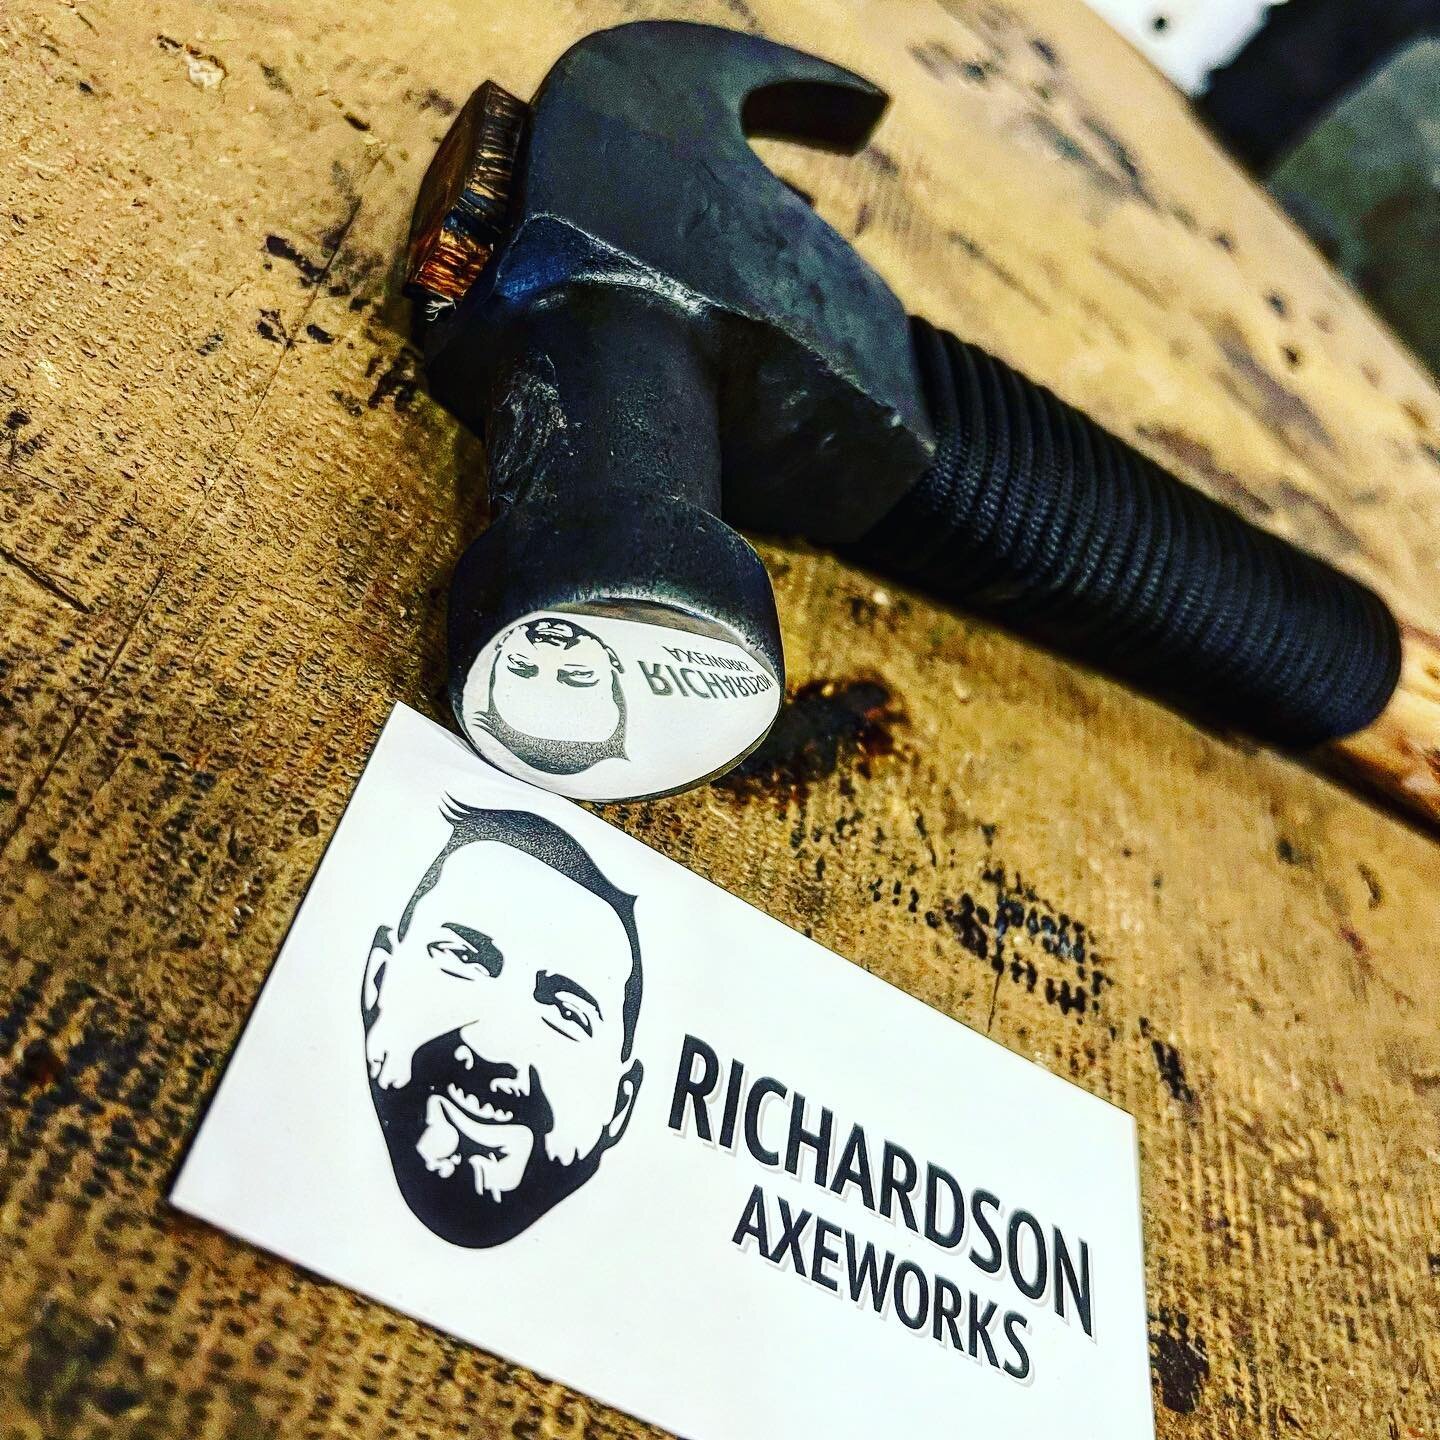 Hammer Time! Custom hammer for @matt.nowell1102 and his new business Shades Creek Services!